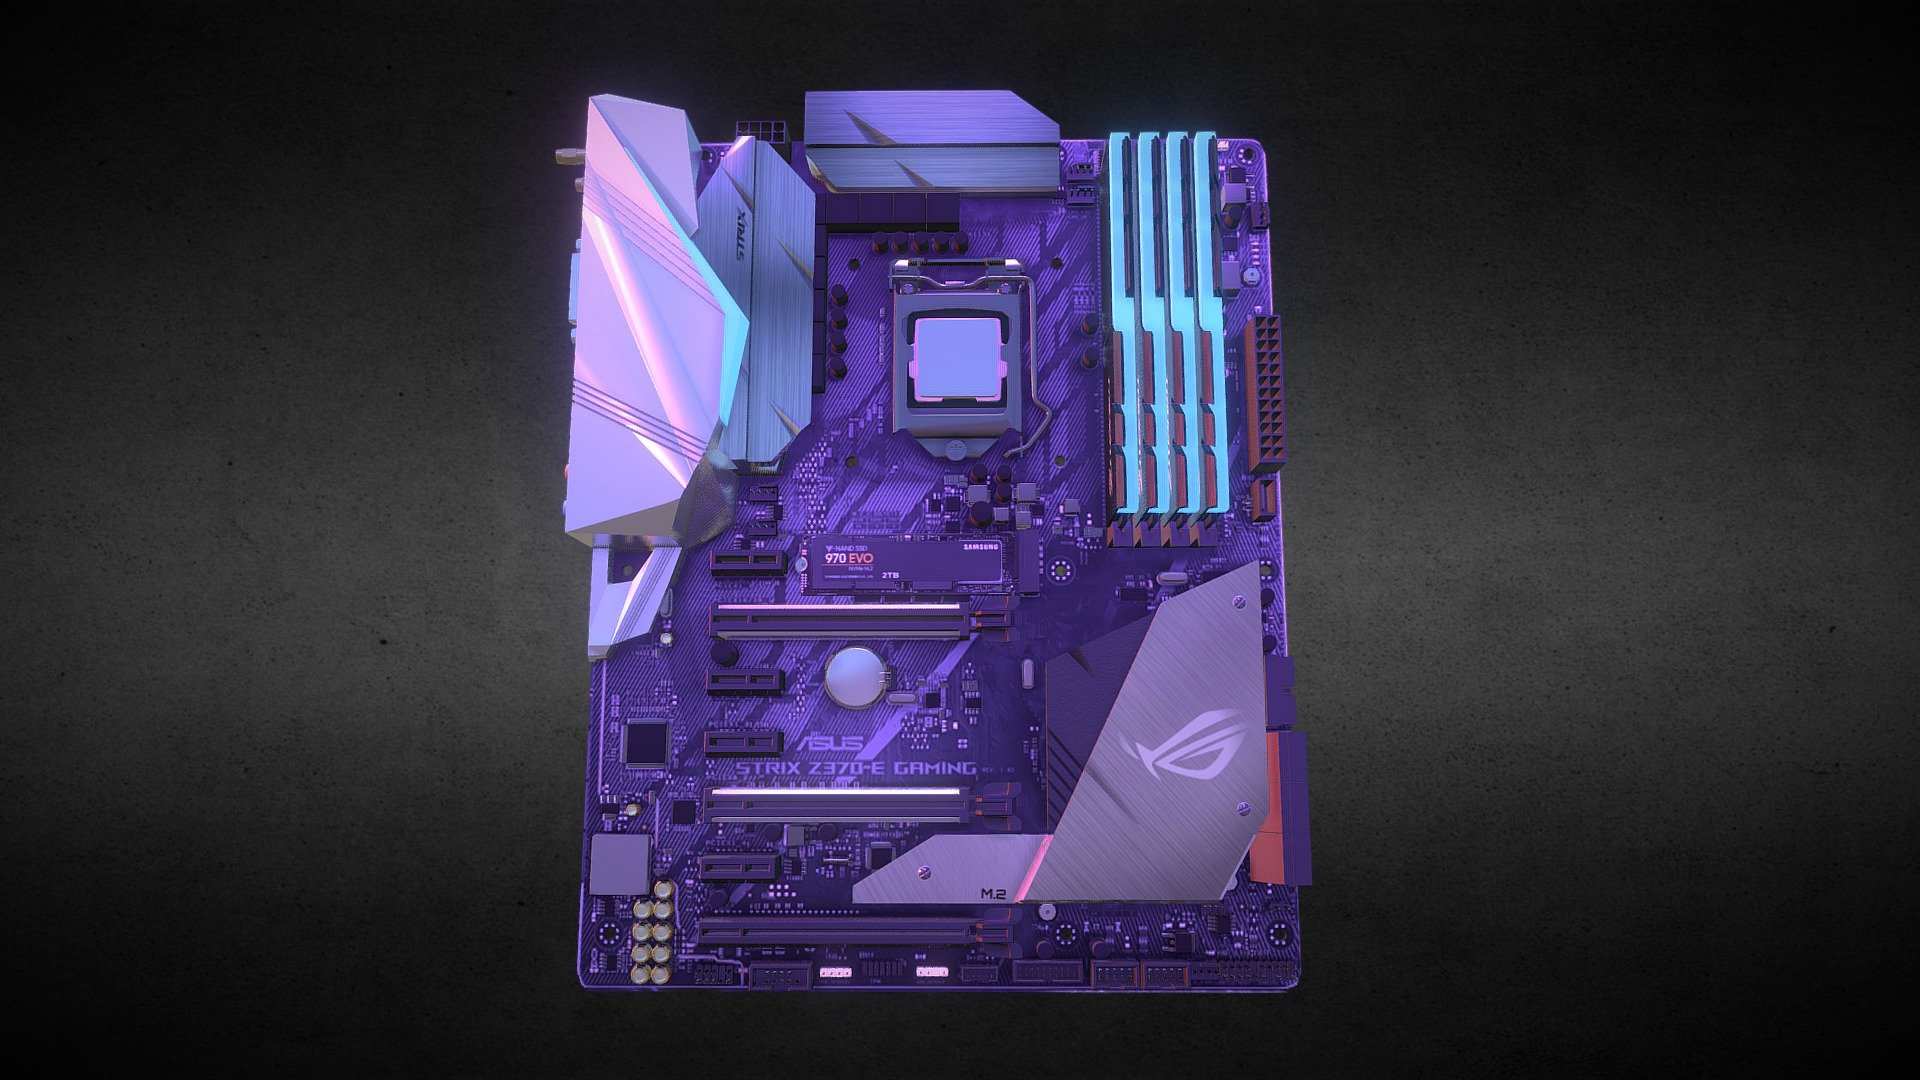 This is the Motherboard, CPU, Ram and M.2 SSD I made for my computer animation class. The models were made to be part of my other model : Dream Computer Setup!

This features an ASUS z370-e gaming motherboard with an intel I7-9700k, Samsung EVO 2 TB M.2 SSD, and Trident RGB RAM - MotherBoard + Components - Download Free 3D model by Daniel Cardona (@DanielCardonaArt) 3d model